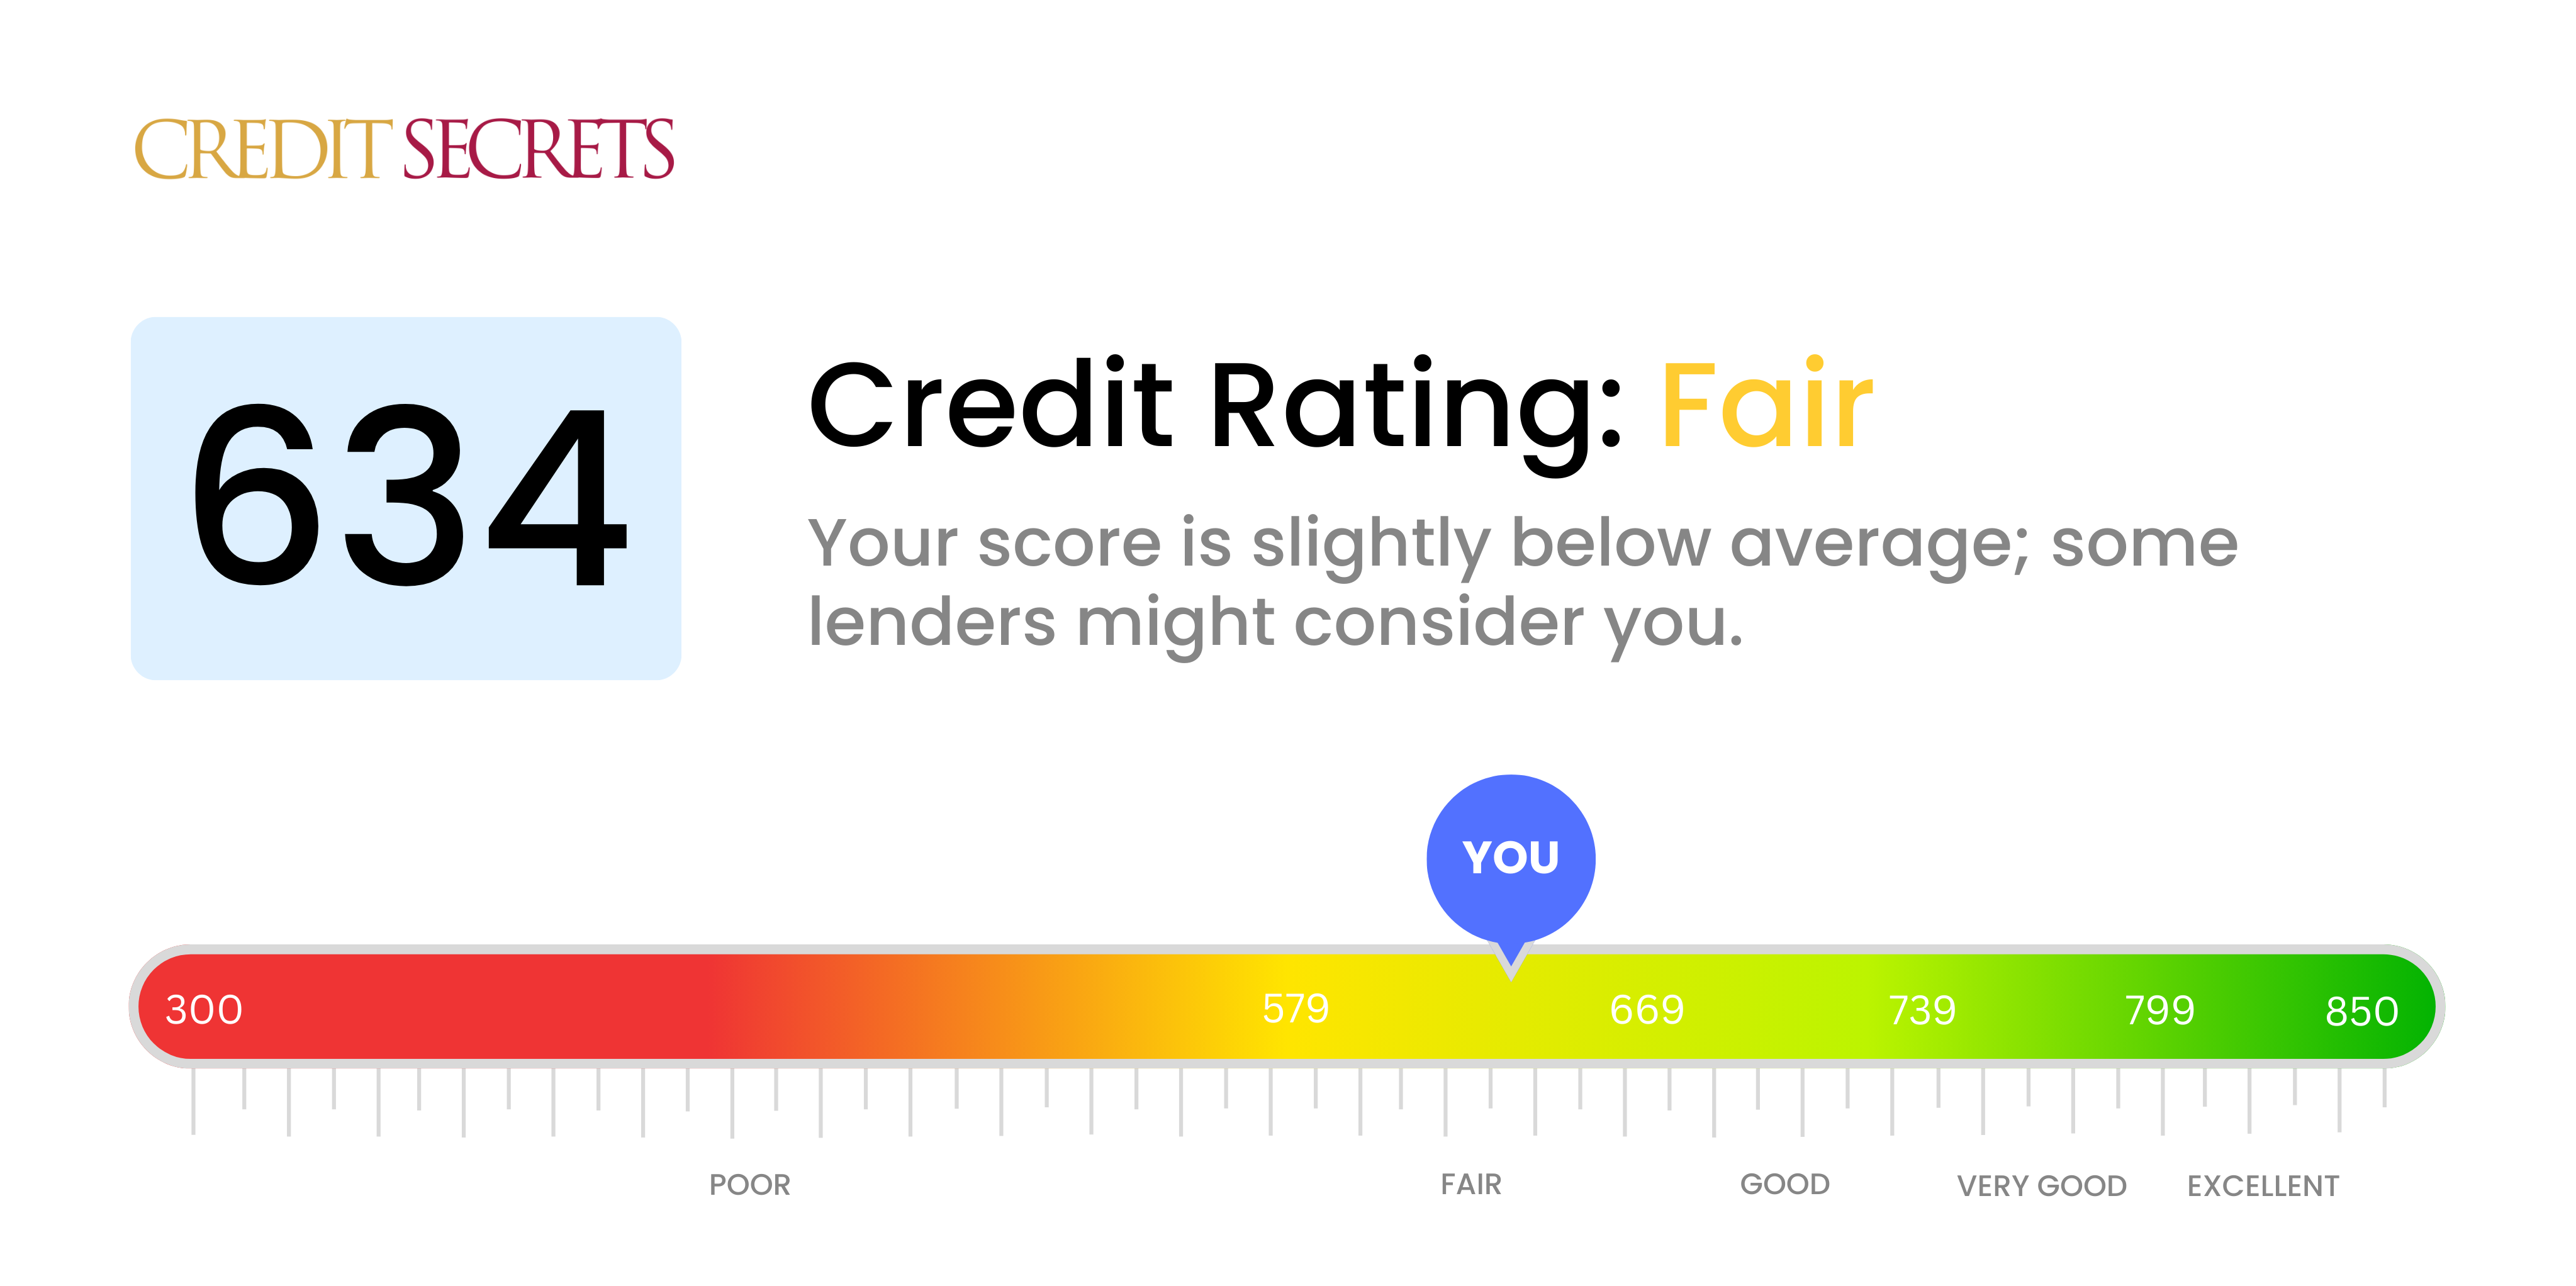 Is 634 a good credit score?